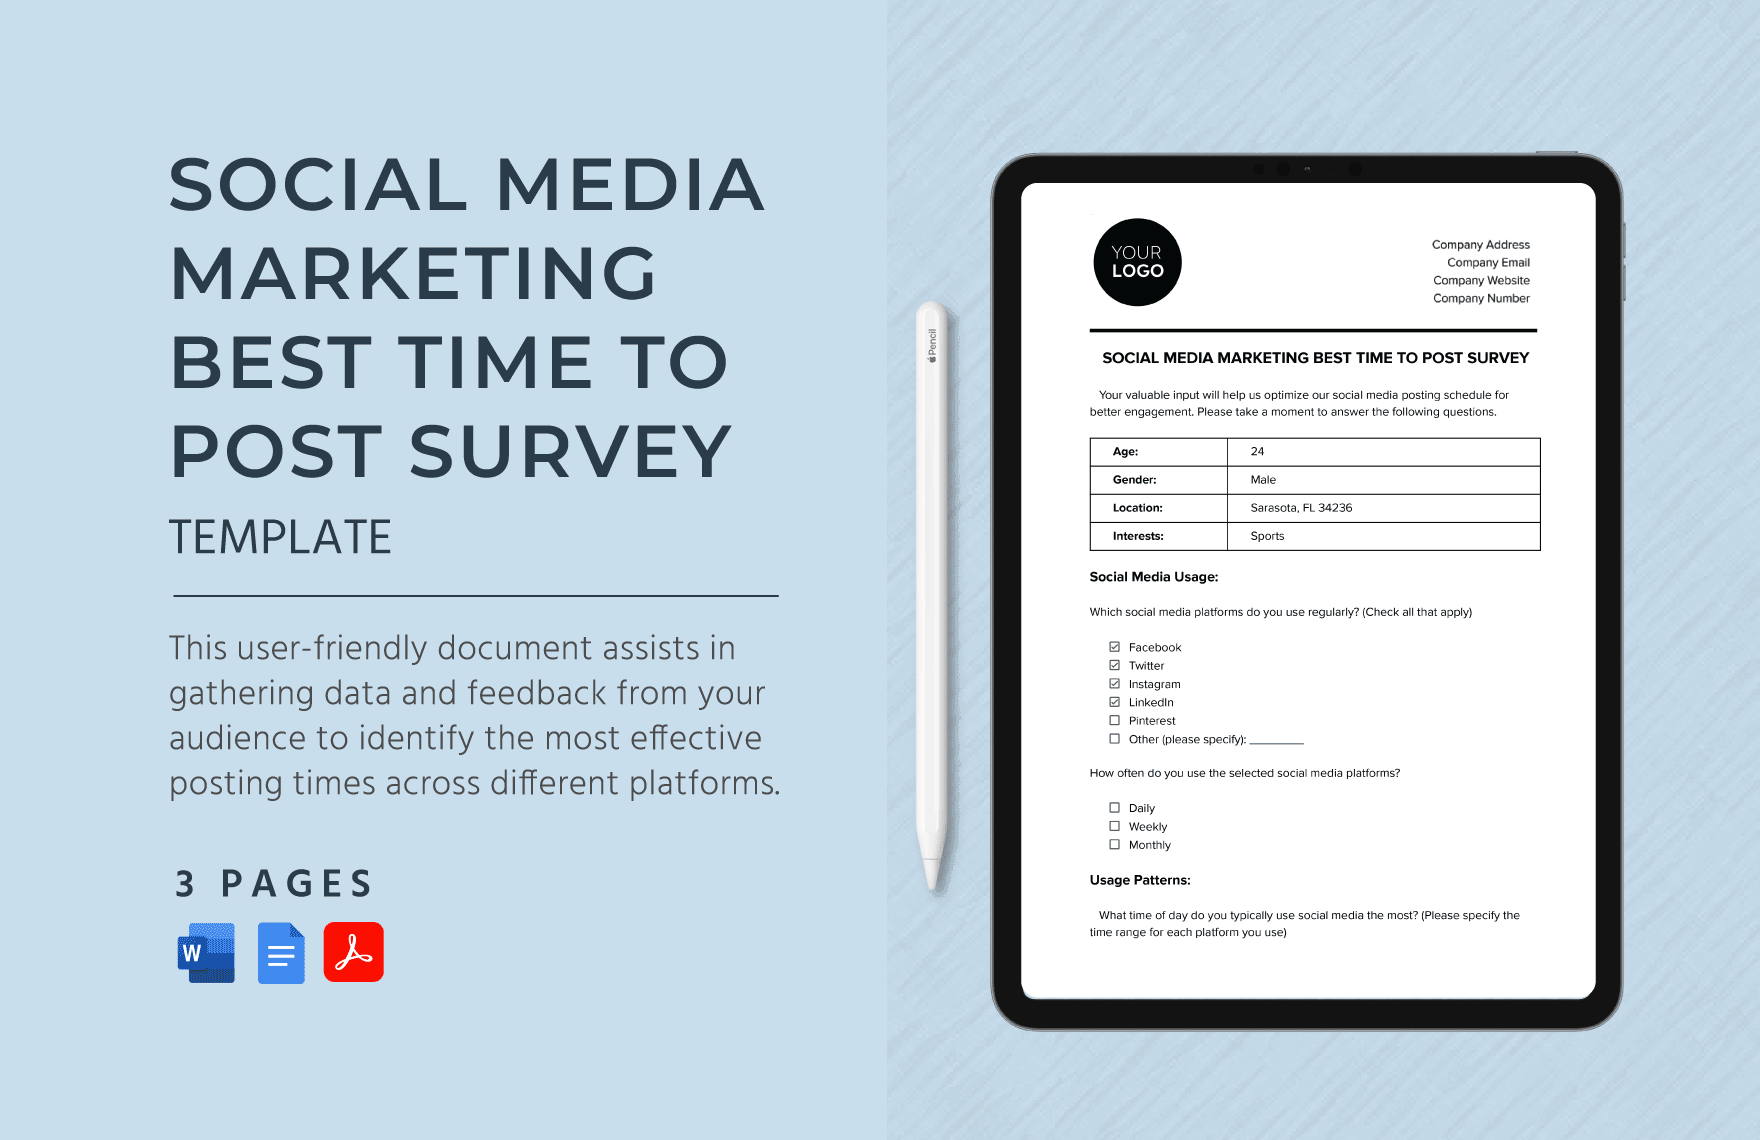 Social Media Marketing Best Time to Post Survey Template